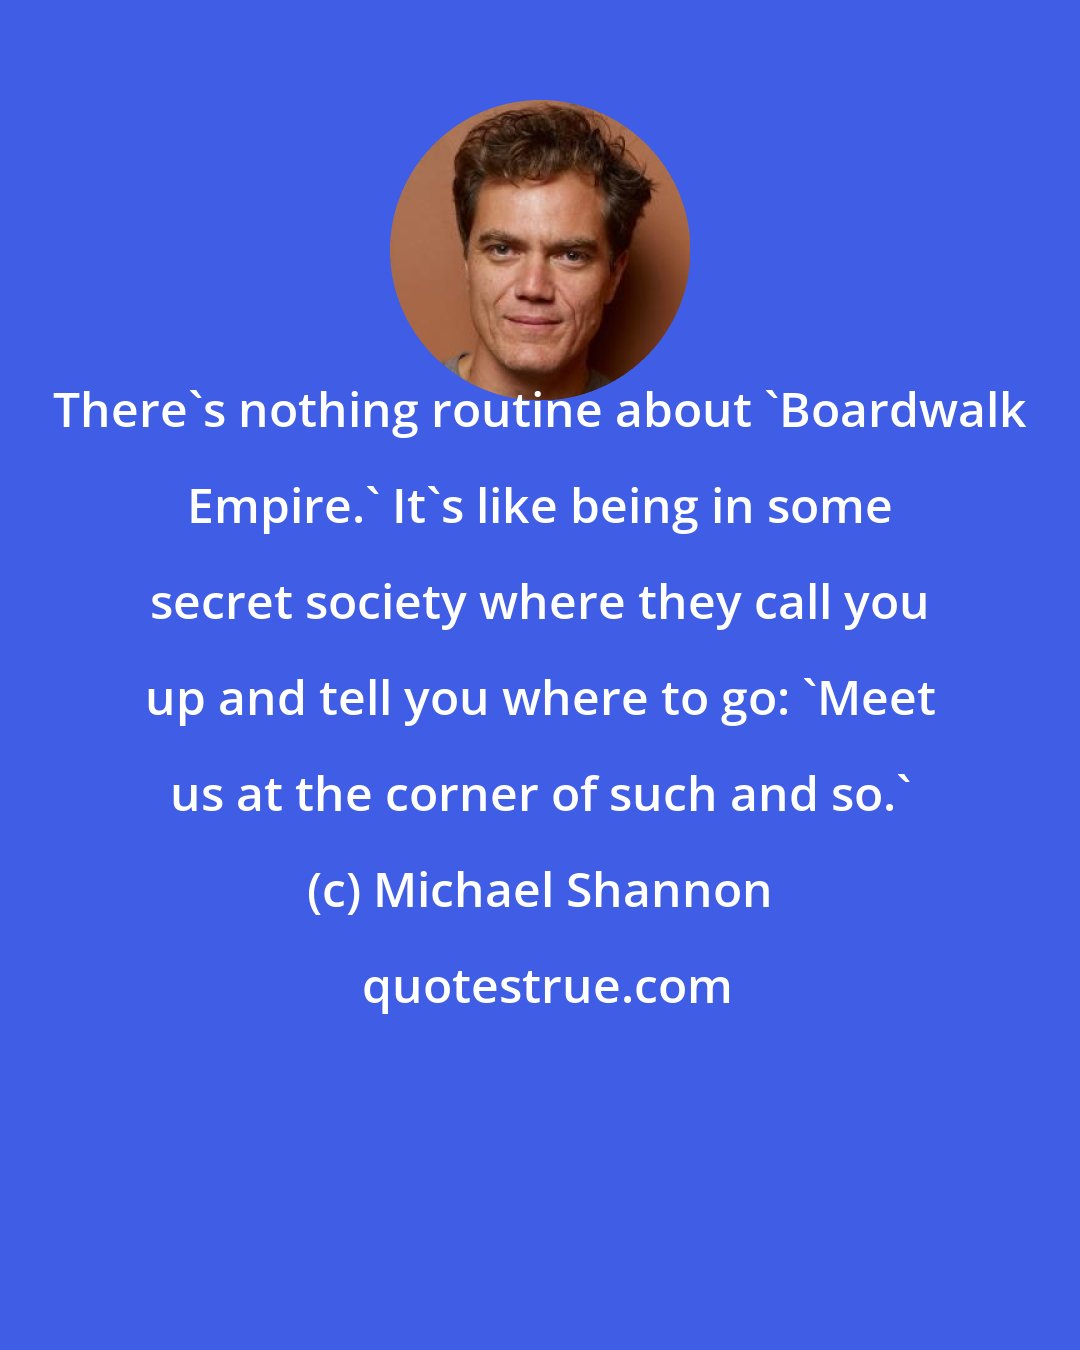 Michael Shannon: There's nothing routine about 'Boardwalk Empire.' It's like being in some secret society where they call you up and tell you where to go: 'Meet us at the corner of such and so.'